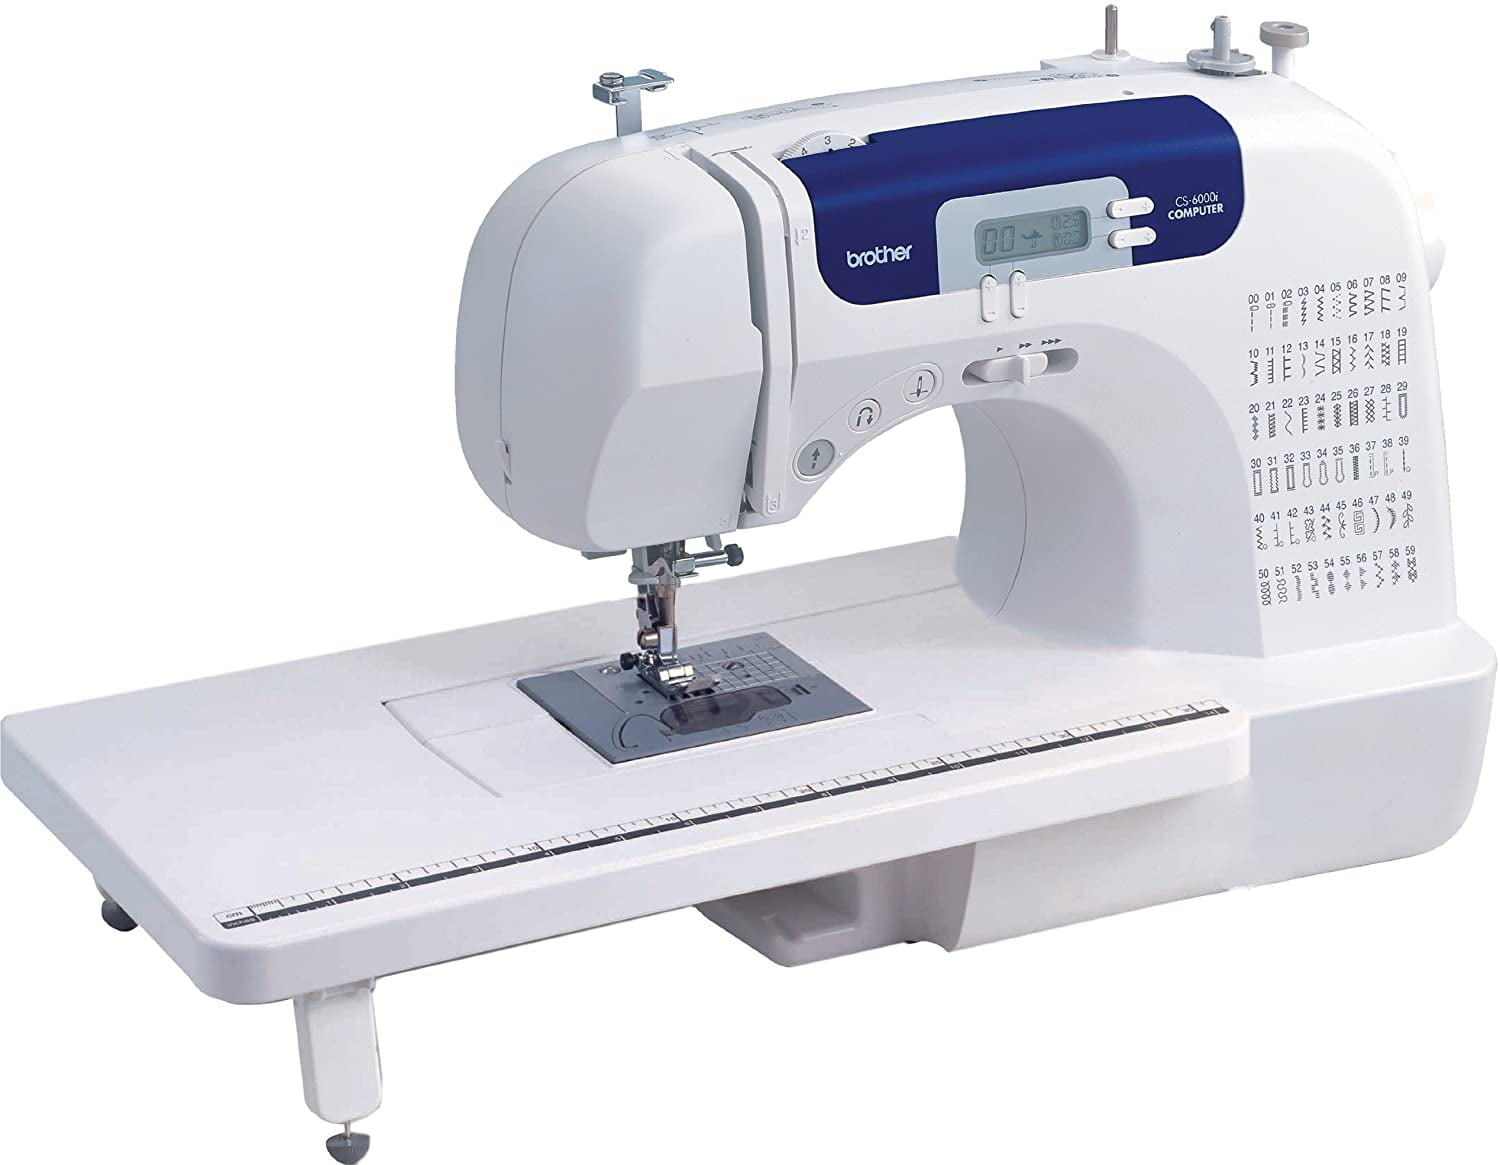 brother cs6000i Sewing machine - arts & crafts - by owner - sale -  craigslist